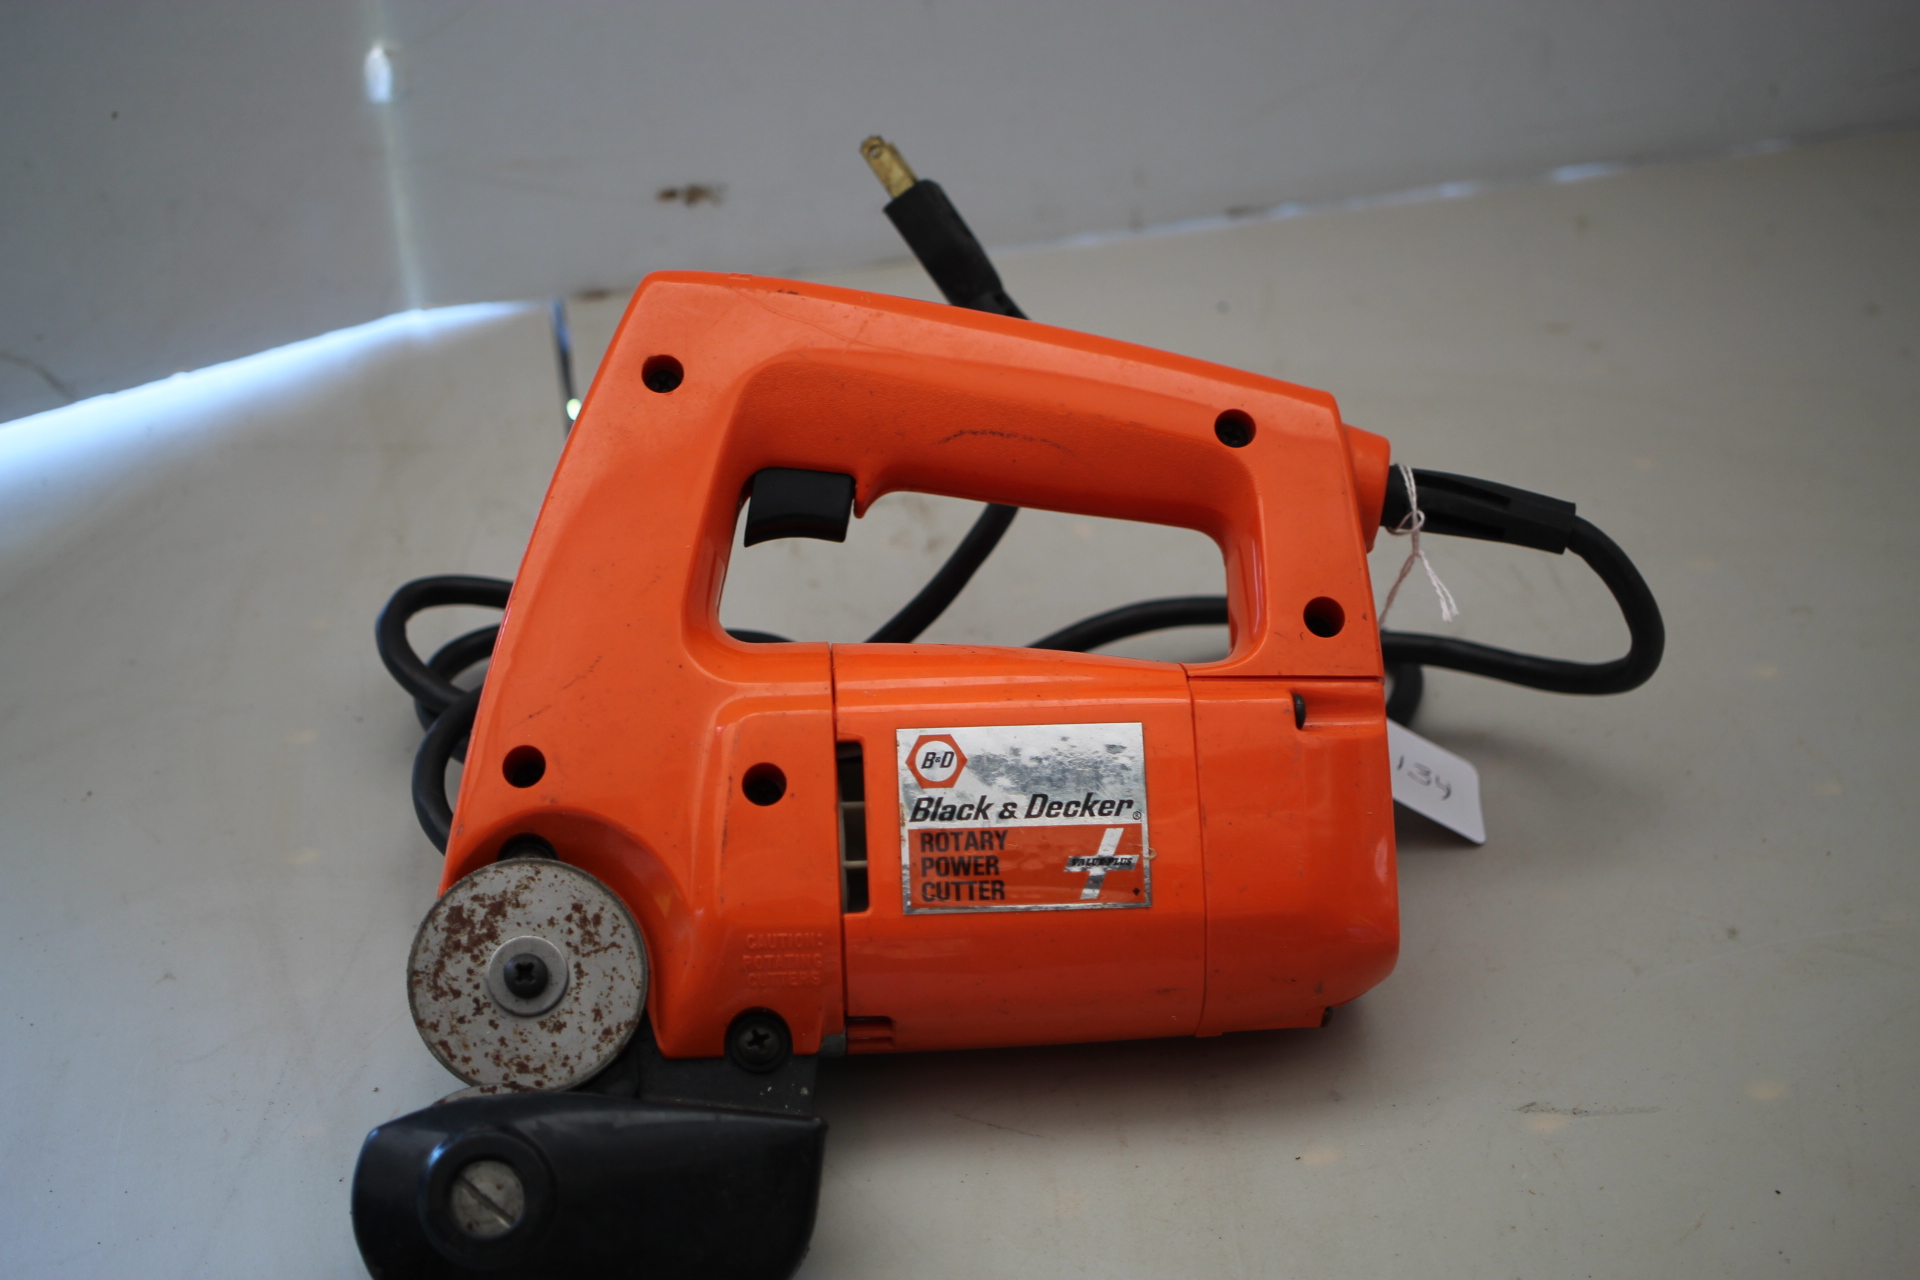 Black & Decker Reciprocating Saw - Roller Auctions